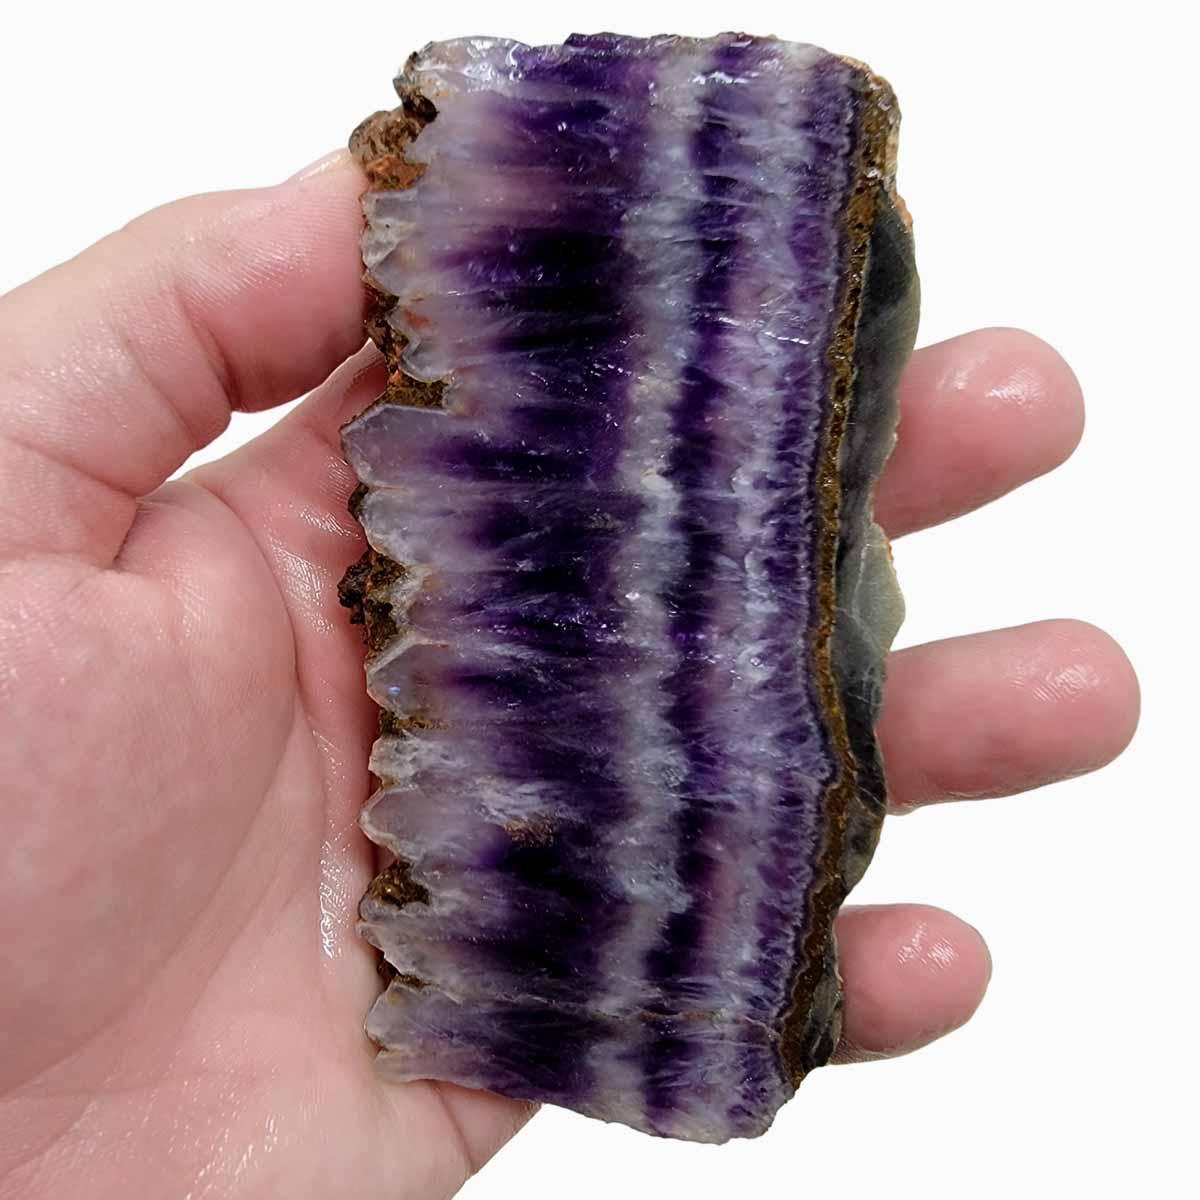 Moroccan Amethyst Lace Agate Slab! Lapidary Stone Slab! - Lapidary Central